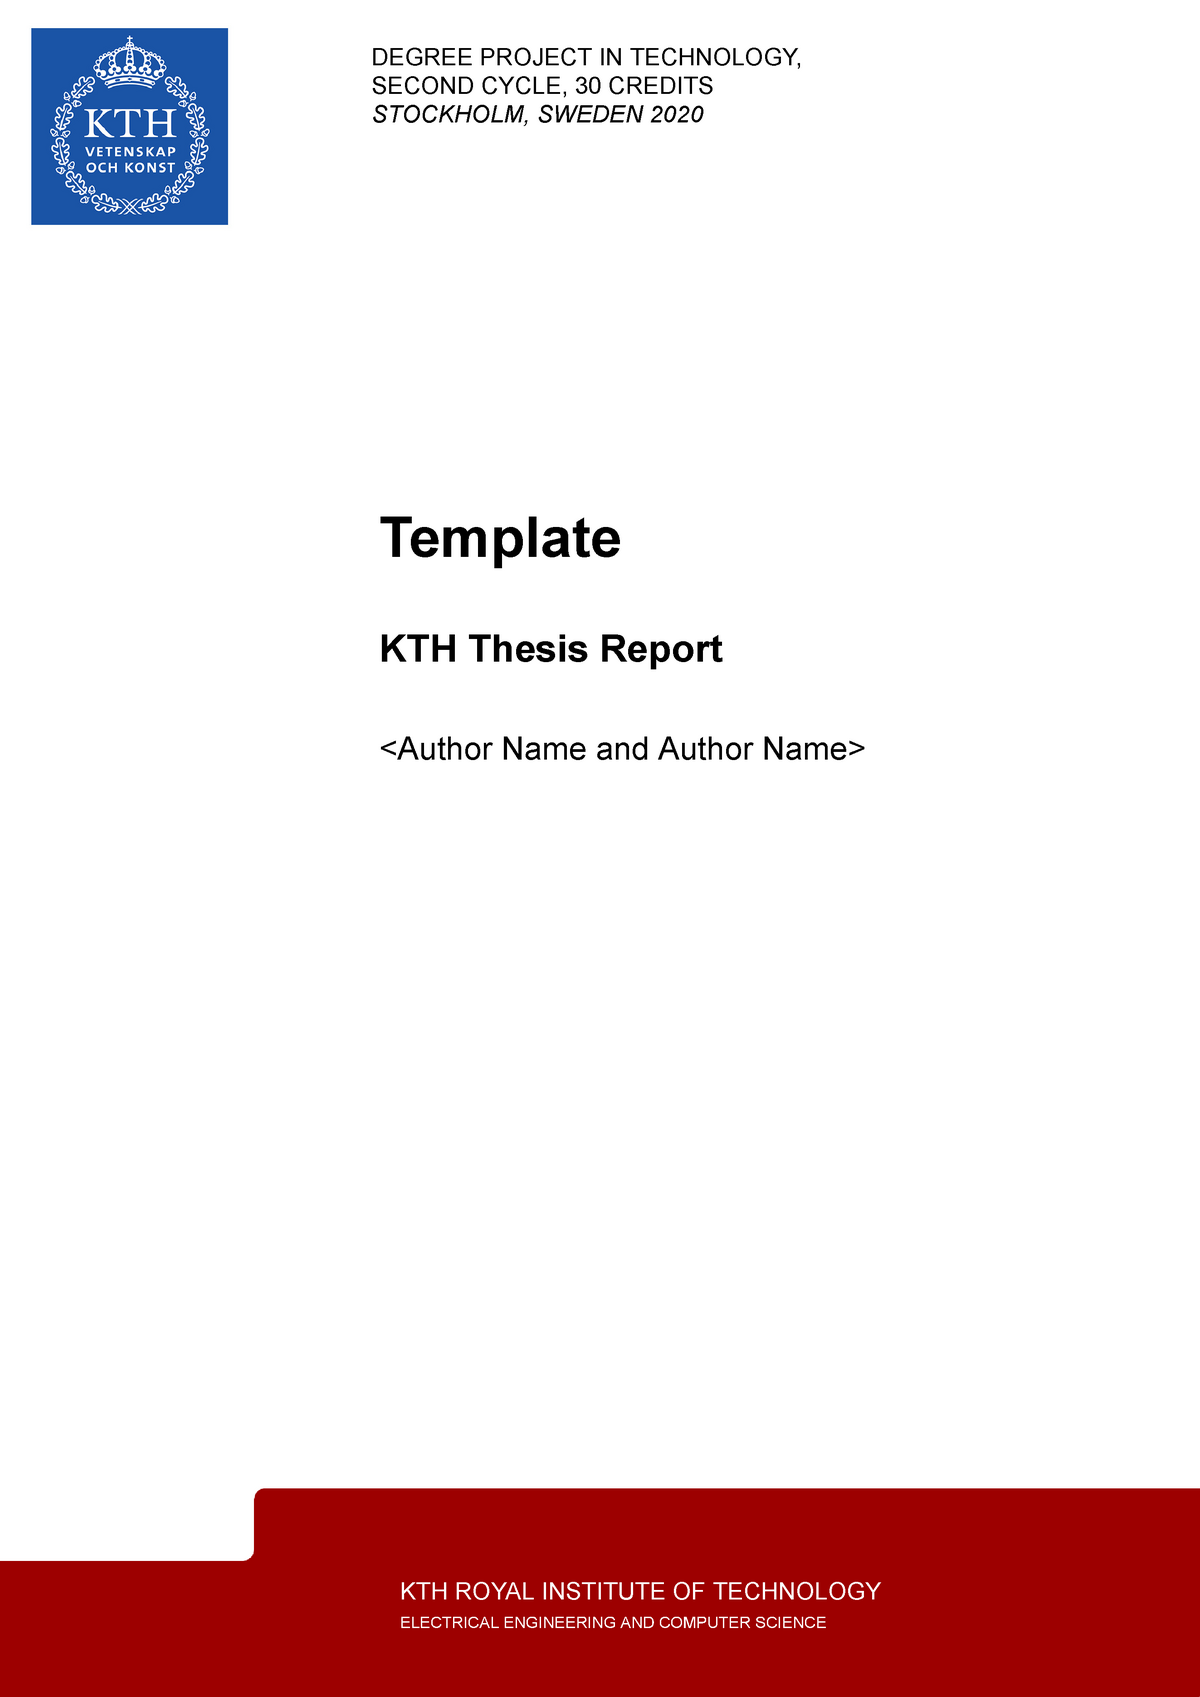 thesis proposal kth